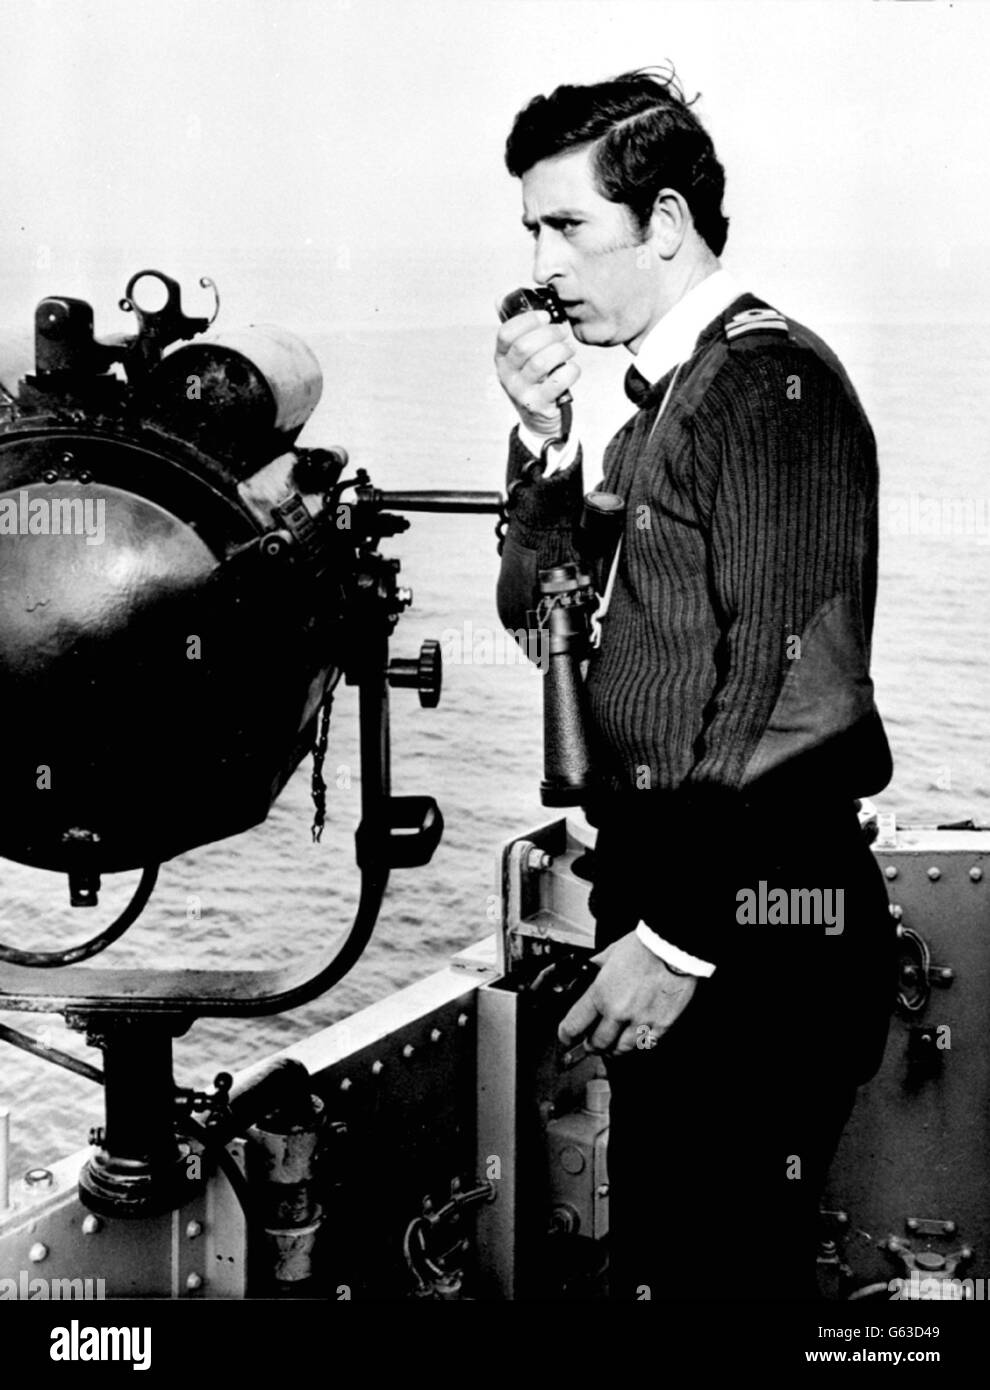 The Prince of Wales, issuing orders aboard his ship, HMS Bronington, the coastal minesweeper off the coast of Scotland, November 1, 1976. * The Prince of Wales today met Kevin Boyle, 41, who worked alongside him on HMS Bronington, during a visit to The Big House, a second-stage house for the homeless in south London, Friday October 11, 2002. Boyle is a resident of The Big House after falling on hard times. Stock Photo